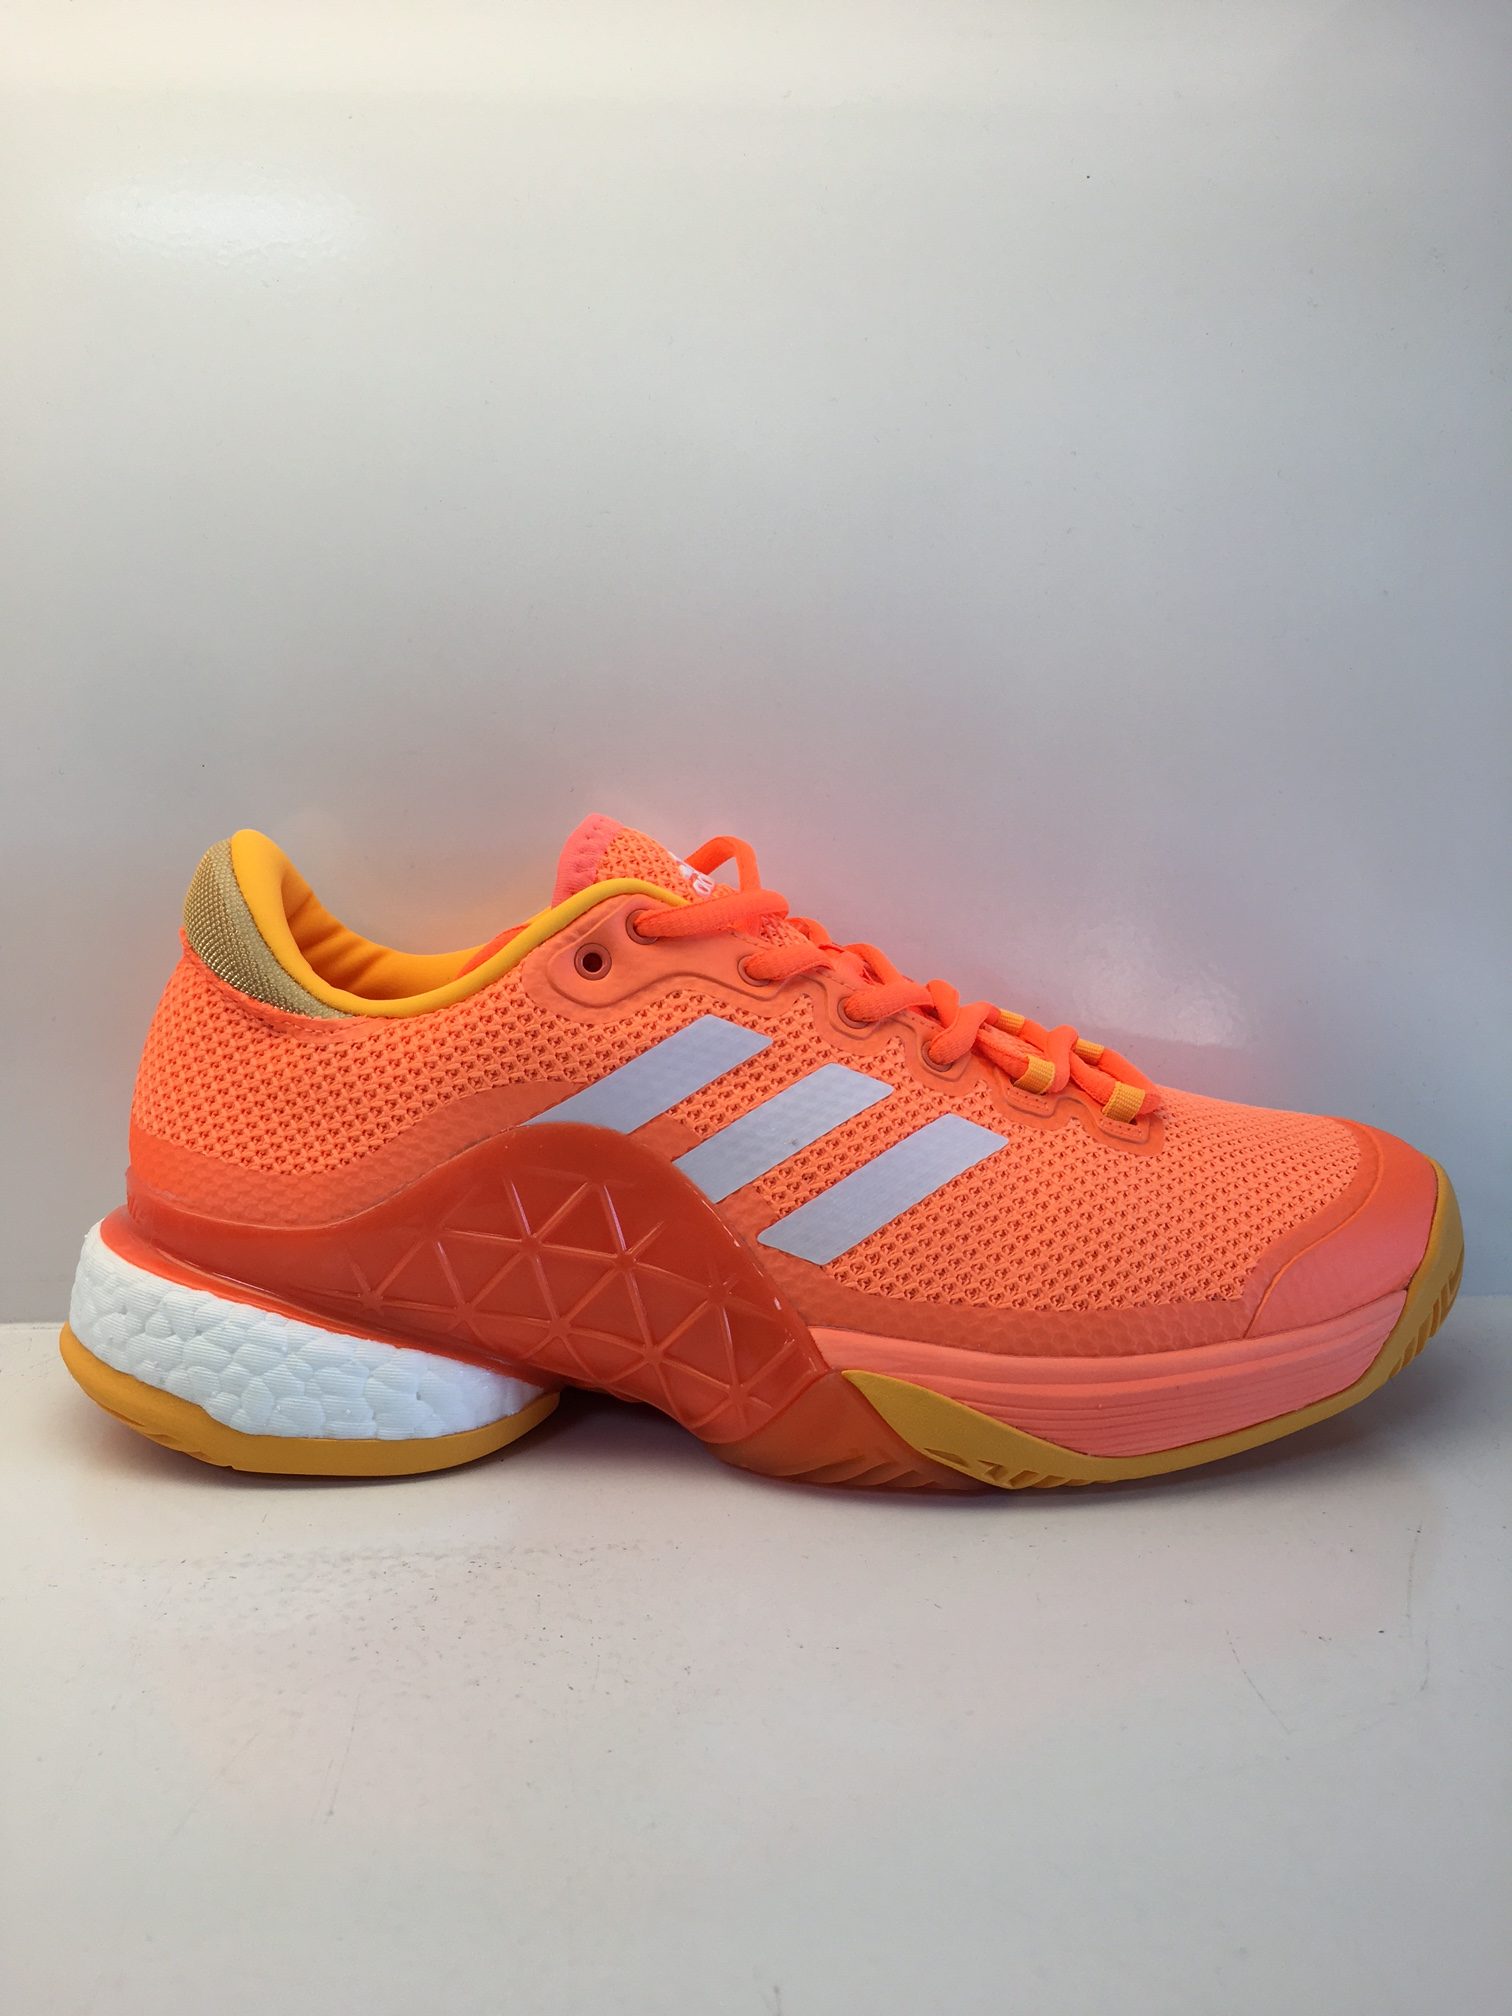 adidas barricade boost review